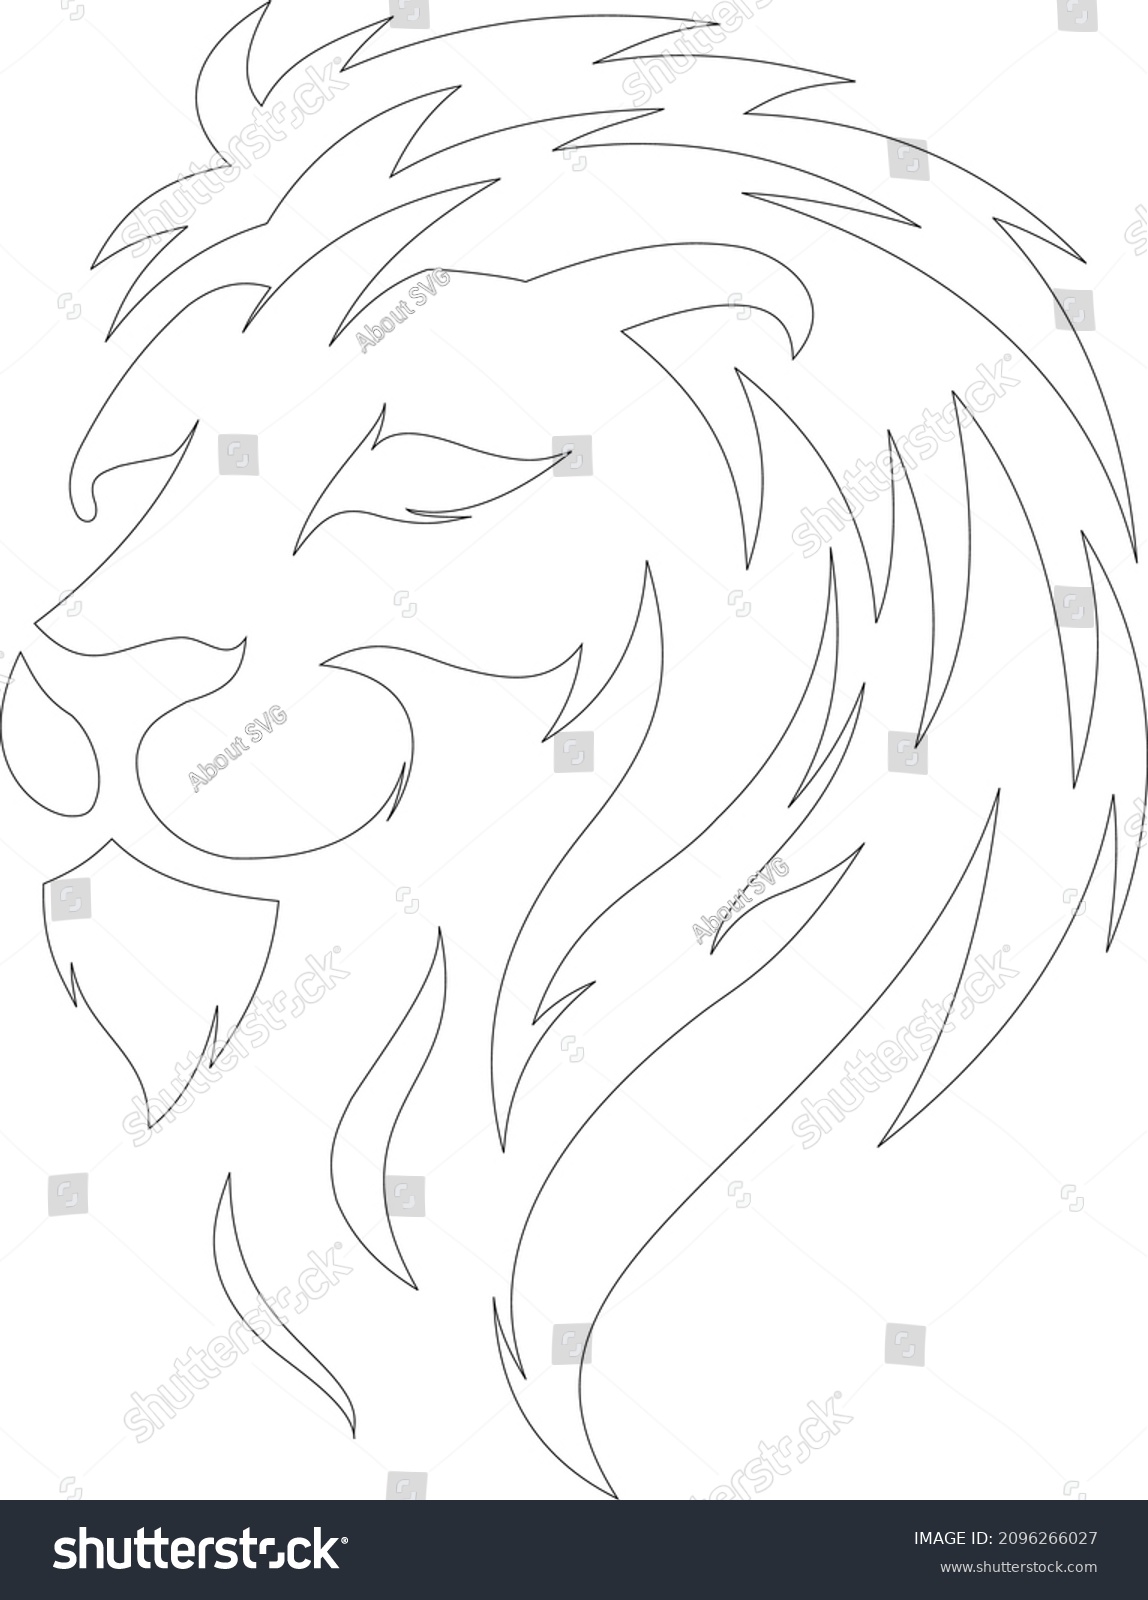 SVG of Lion face vector illustration outline. Coloring book with animal. black and white. white background. ready for print or cutting using EPS or convert to SVG format svg